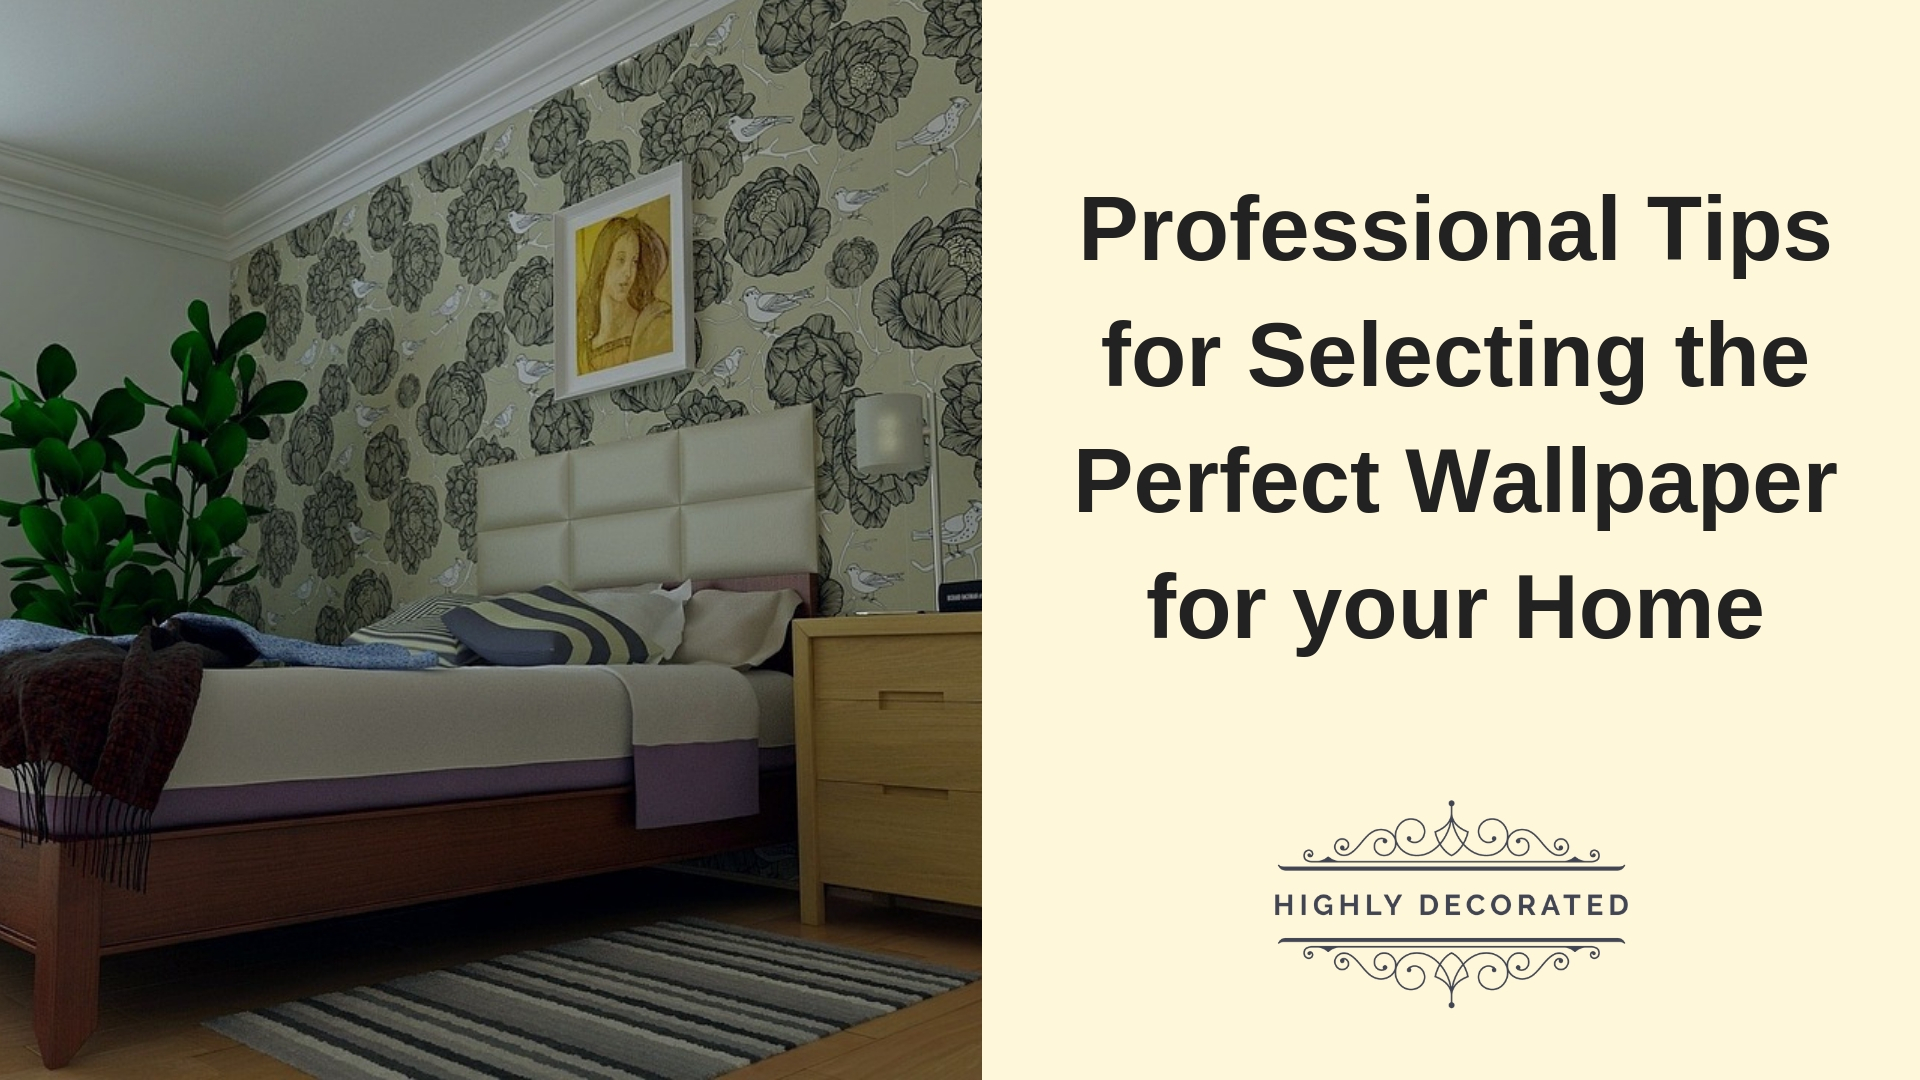 Here Are The Top 3 Fantastic Tips For Selecting The Perfect Wallpaper For Your Home